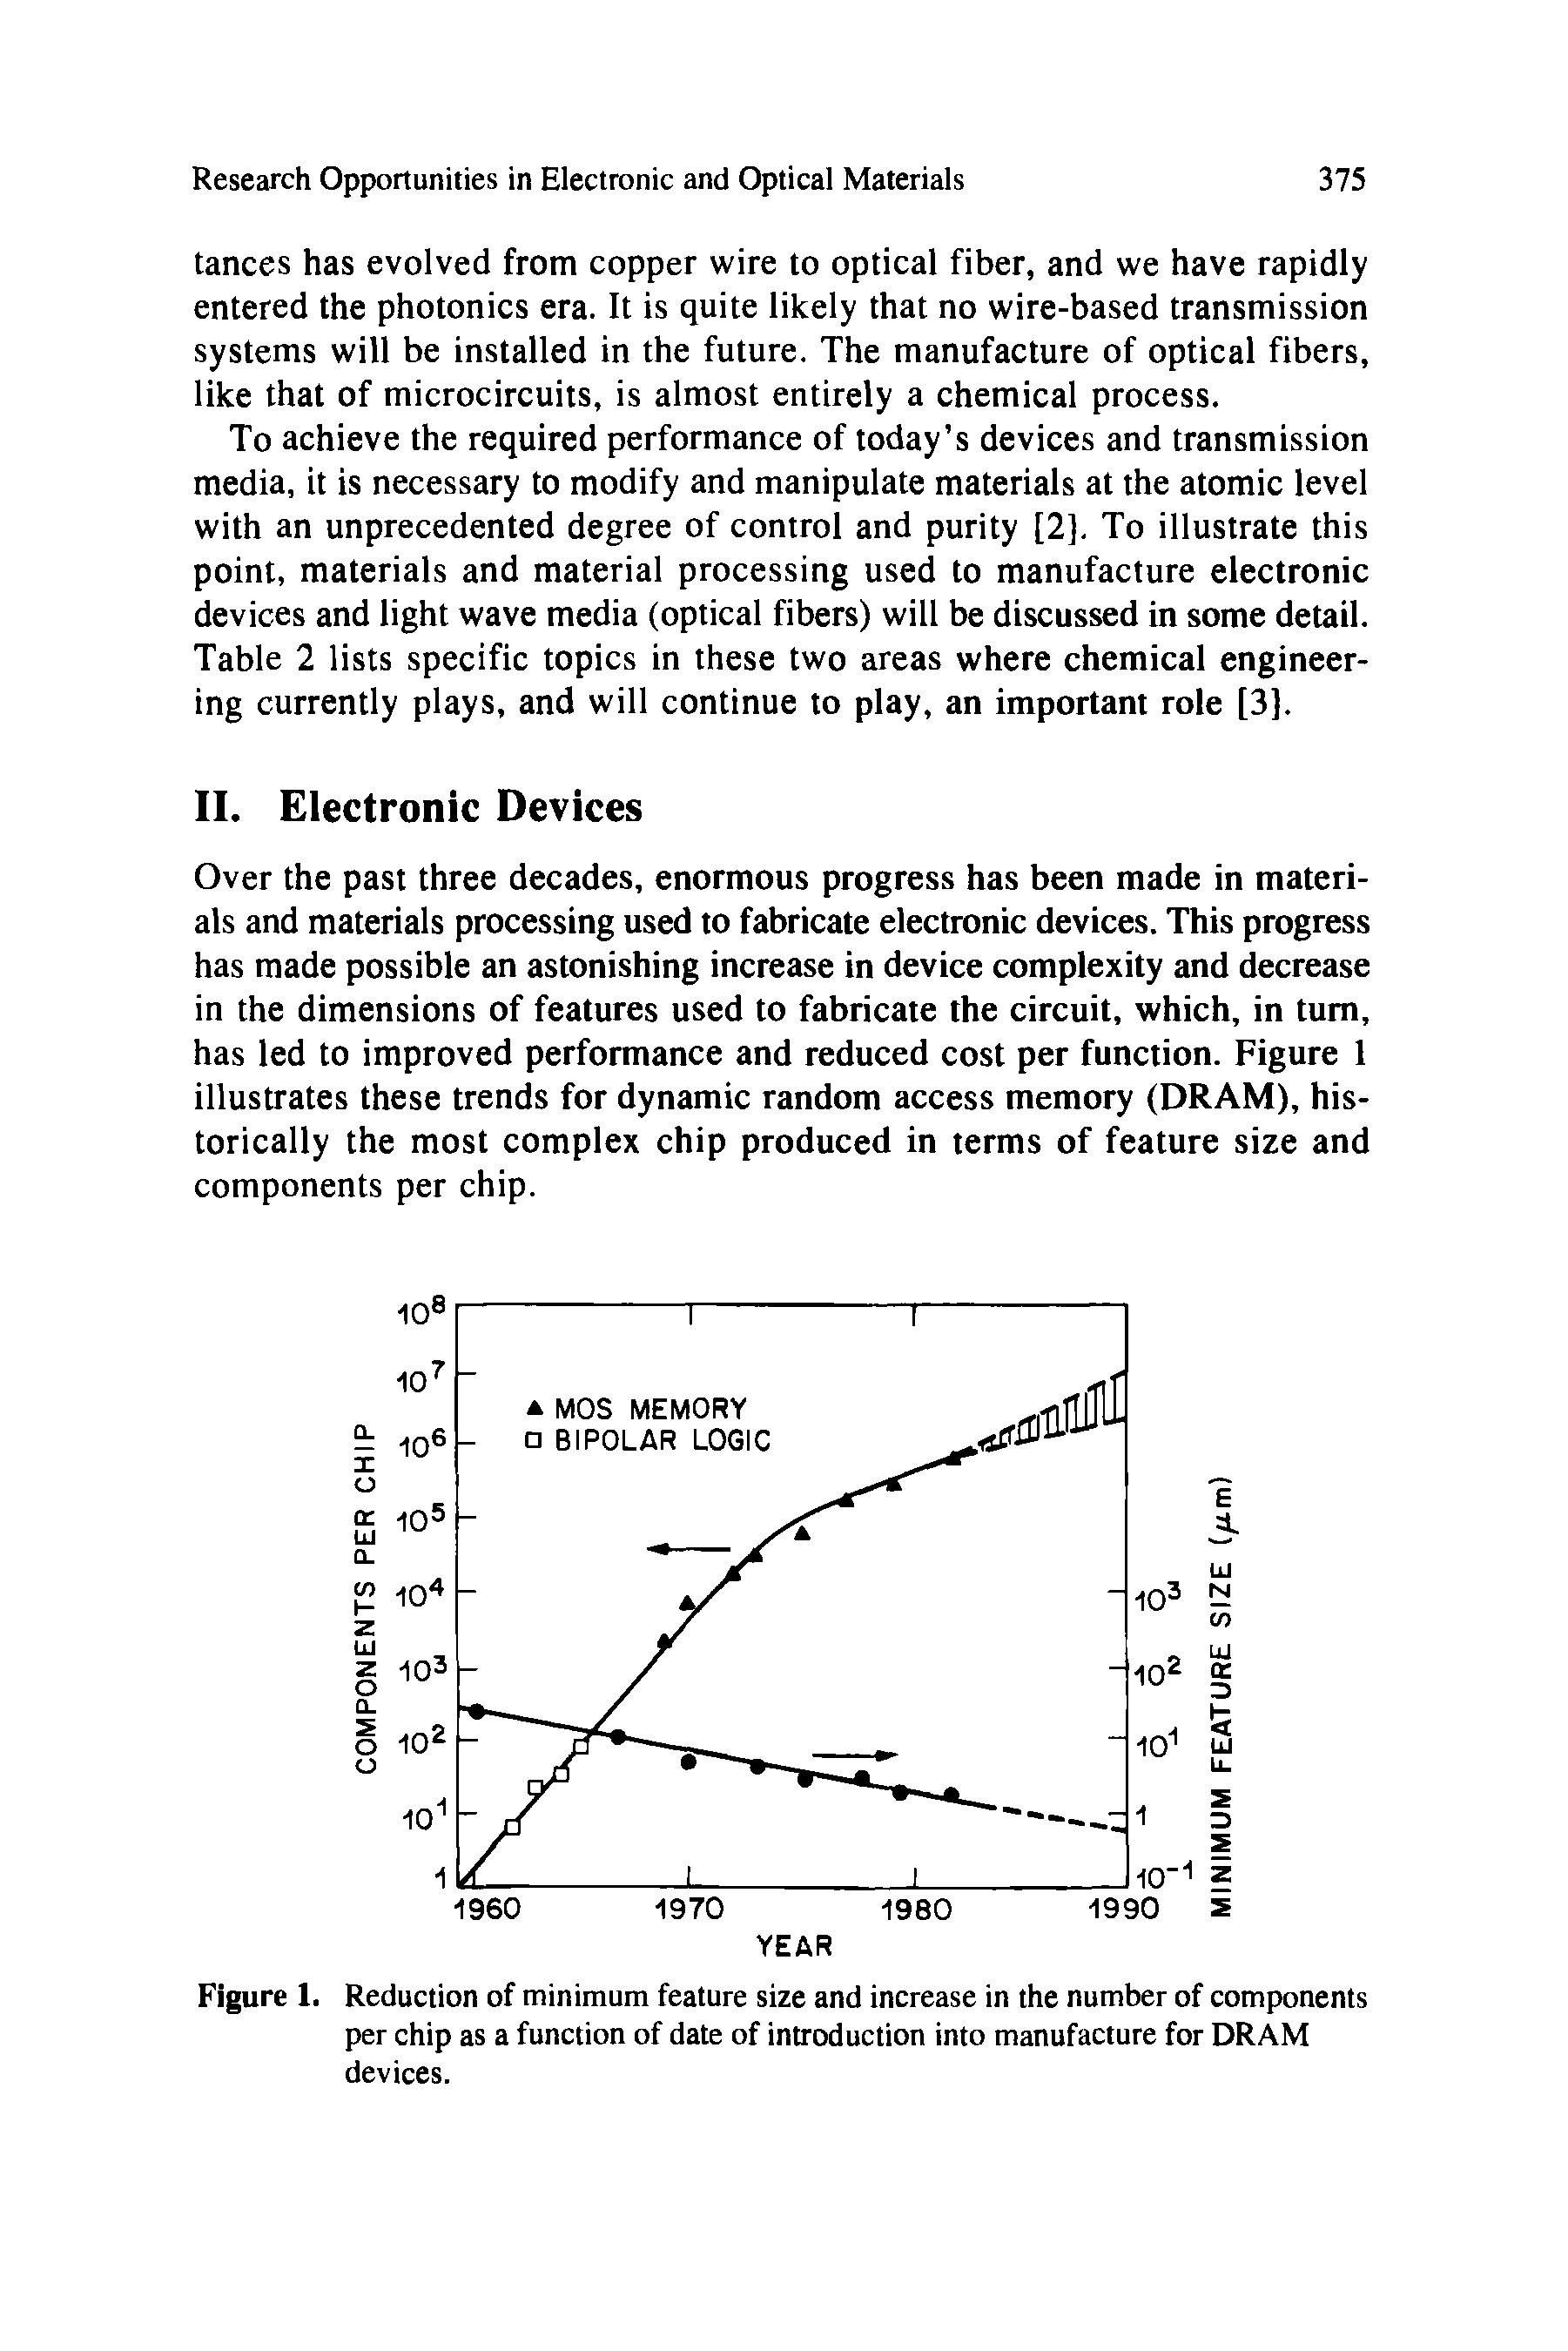 Figure 1. Reduction of minimum feature size and increase in the number of components per chip as a function of date of introduction into manufacture for DRAM devices.